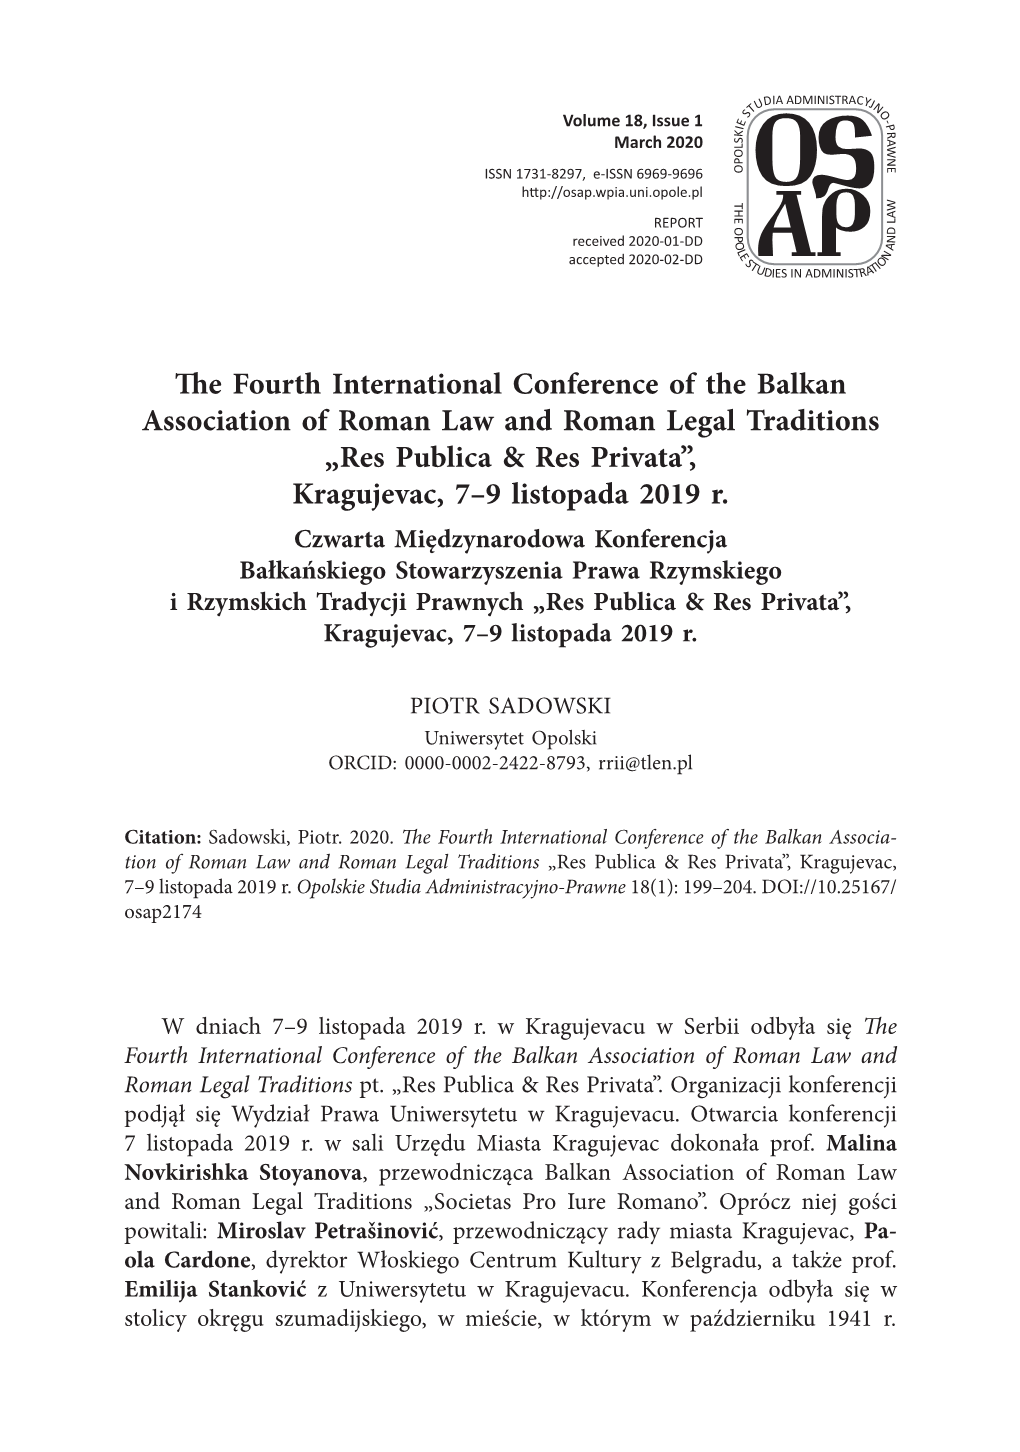 The Fourth International Conference of the Balkan Association of Roman Law and Roman Legal Traditions „Res Publica & Res Privata”, Kragujevac, 7–9 Listopada 2019 R